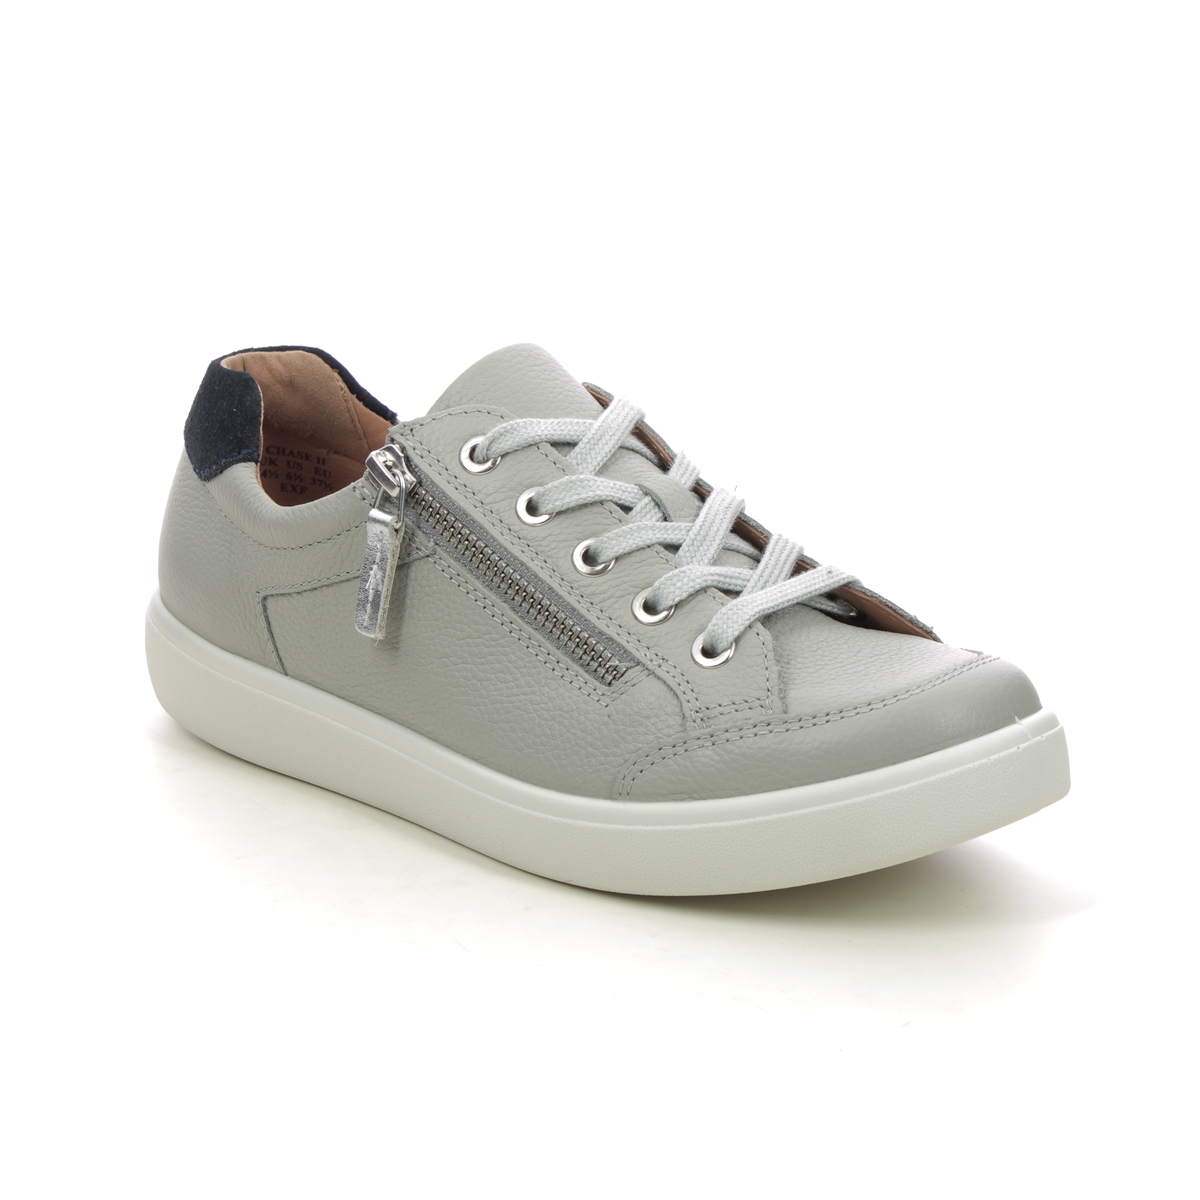 Hotter Chase 2 Wide Light Grey Leather Womens trainers 16116-03 in a Plain Leather in Size 4